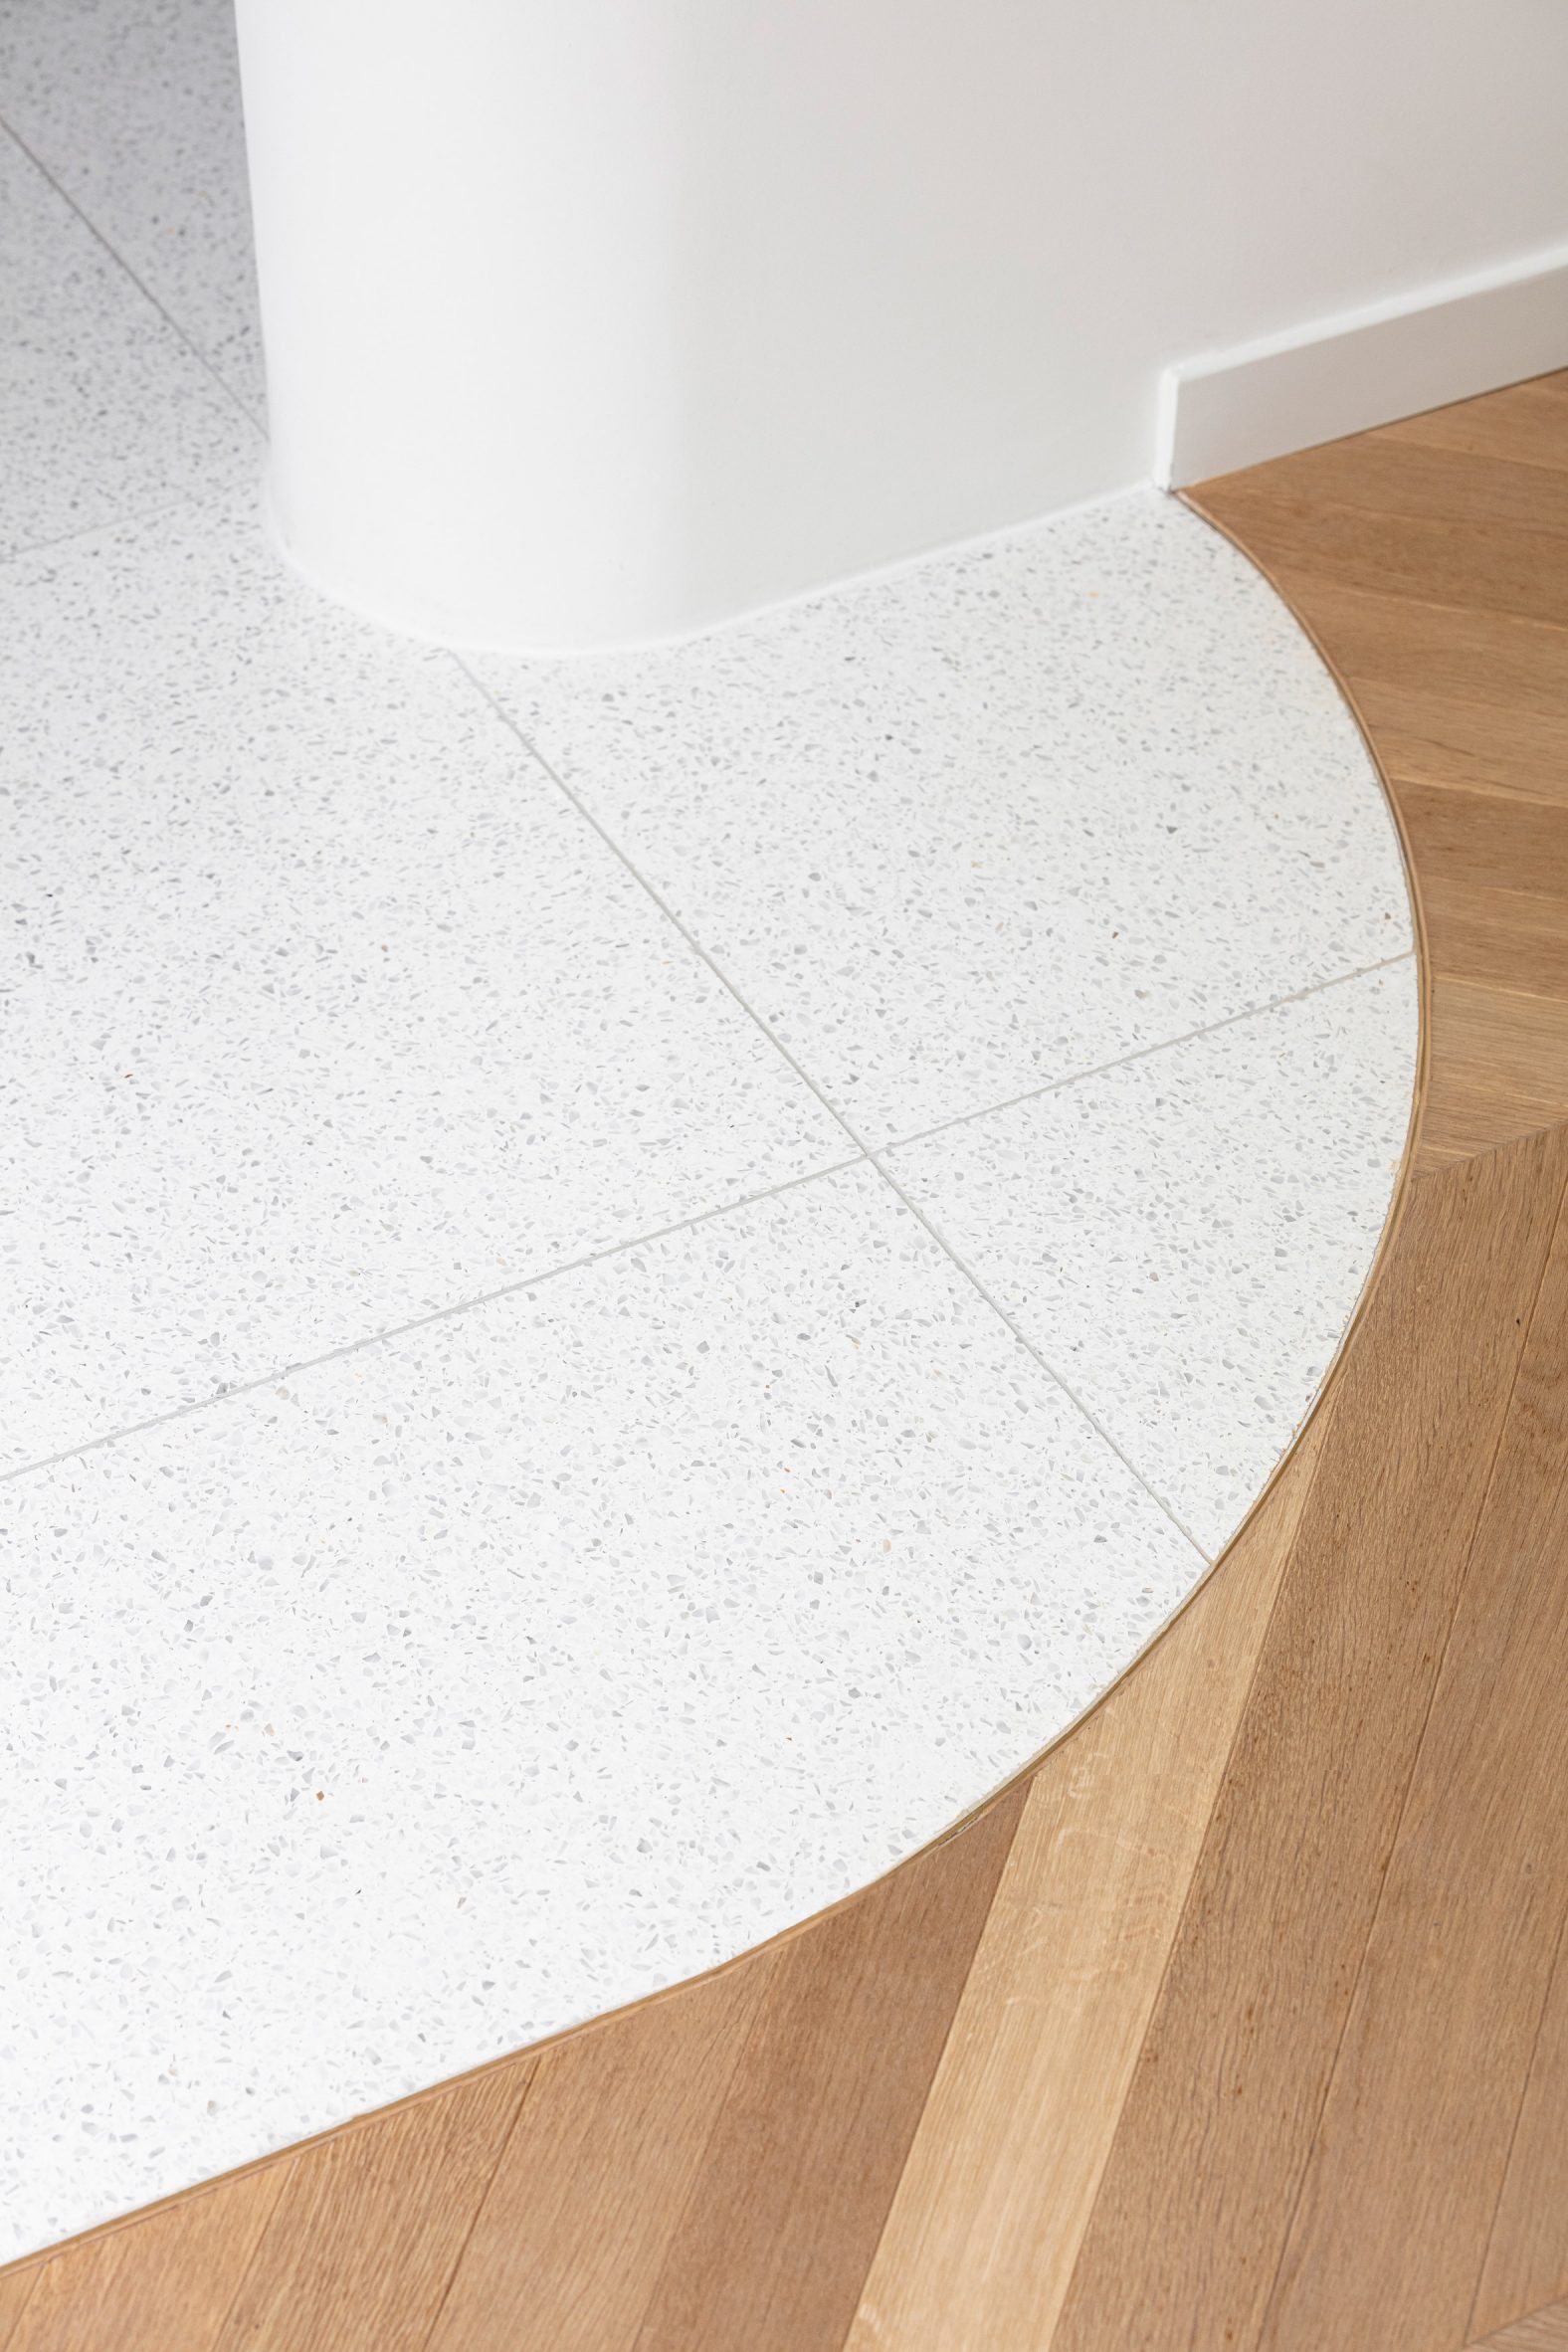 Curved floor detail by Atelier Fréderic Louis